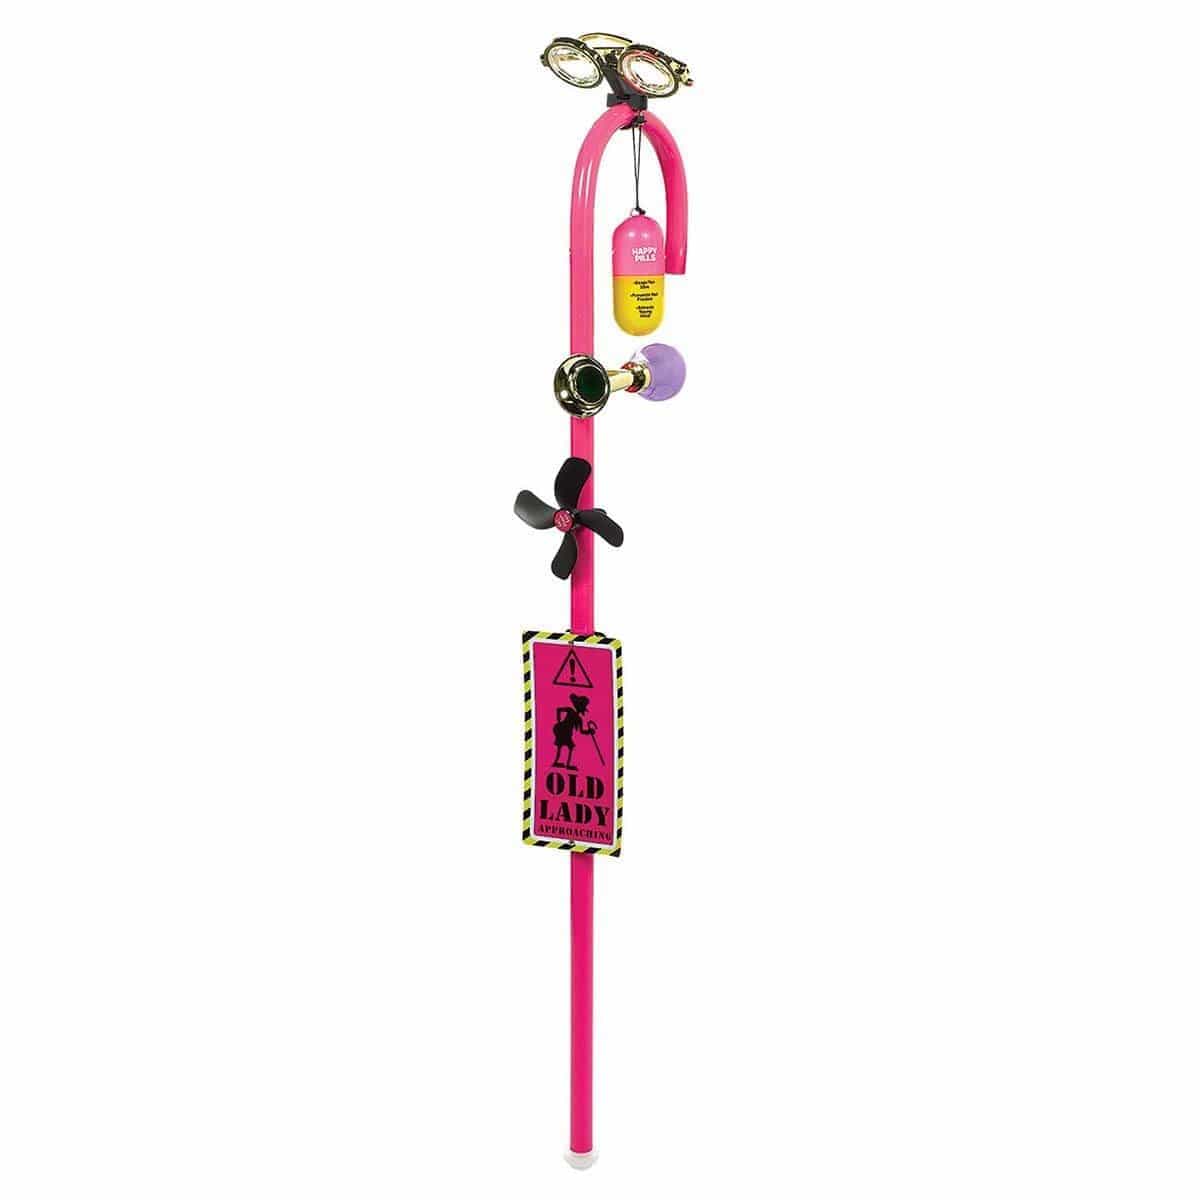 Buy Age Specific Birthday Over The Hill - Female Cane sold at Party Expert